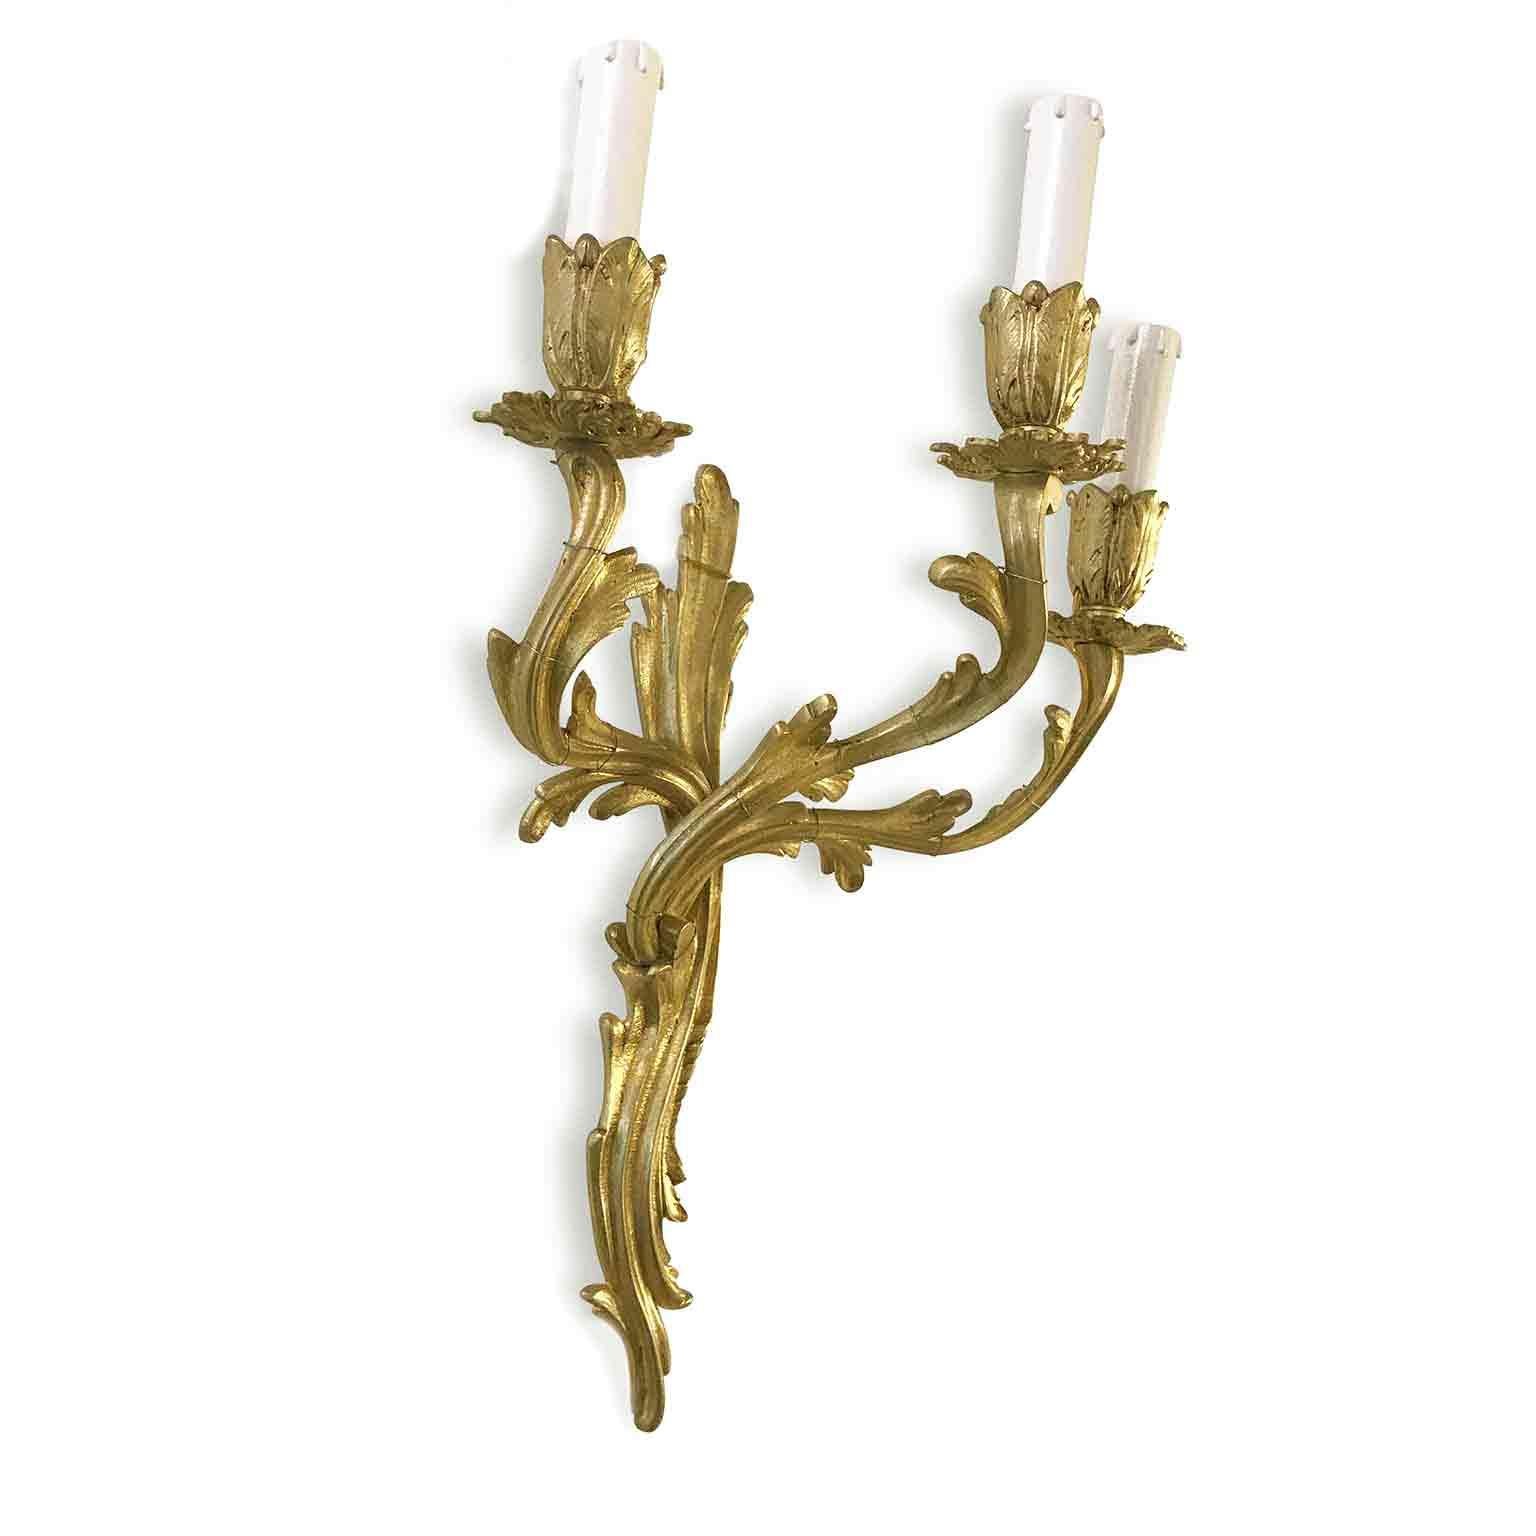 A pair of Louis XV style gilded bronze three-armed antique foliate wall lights sconces, of French origin, dating back to first half of 1900.
Acanthus leaf scrolling arms with leaf bobeche drip pans and bulbous candle sconces, original and beautiful